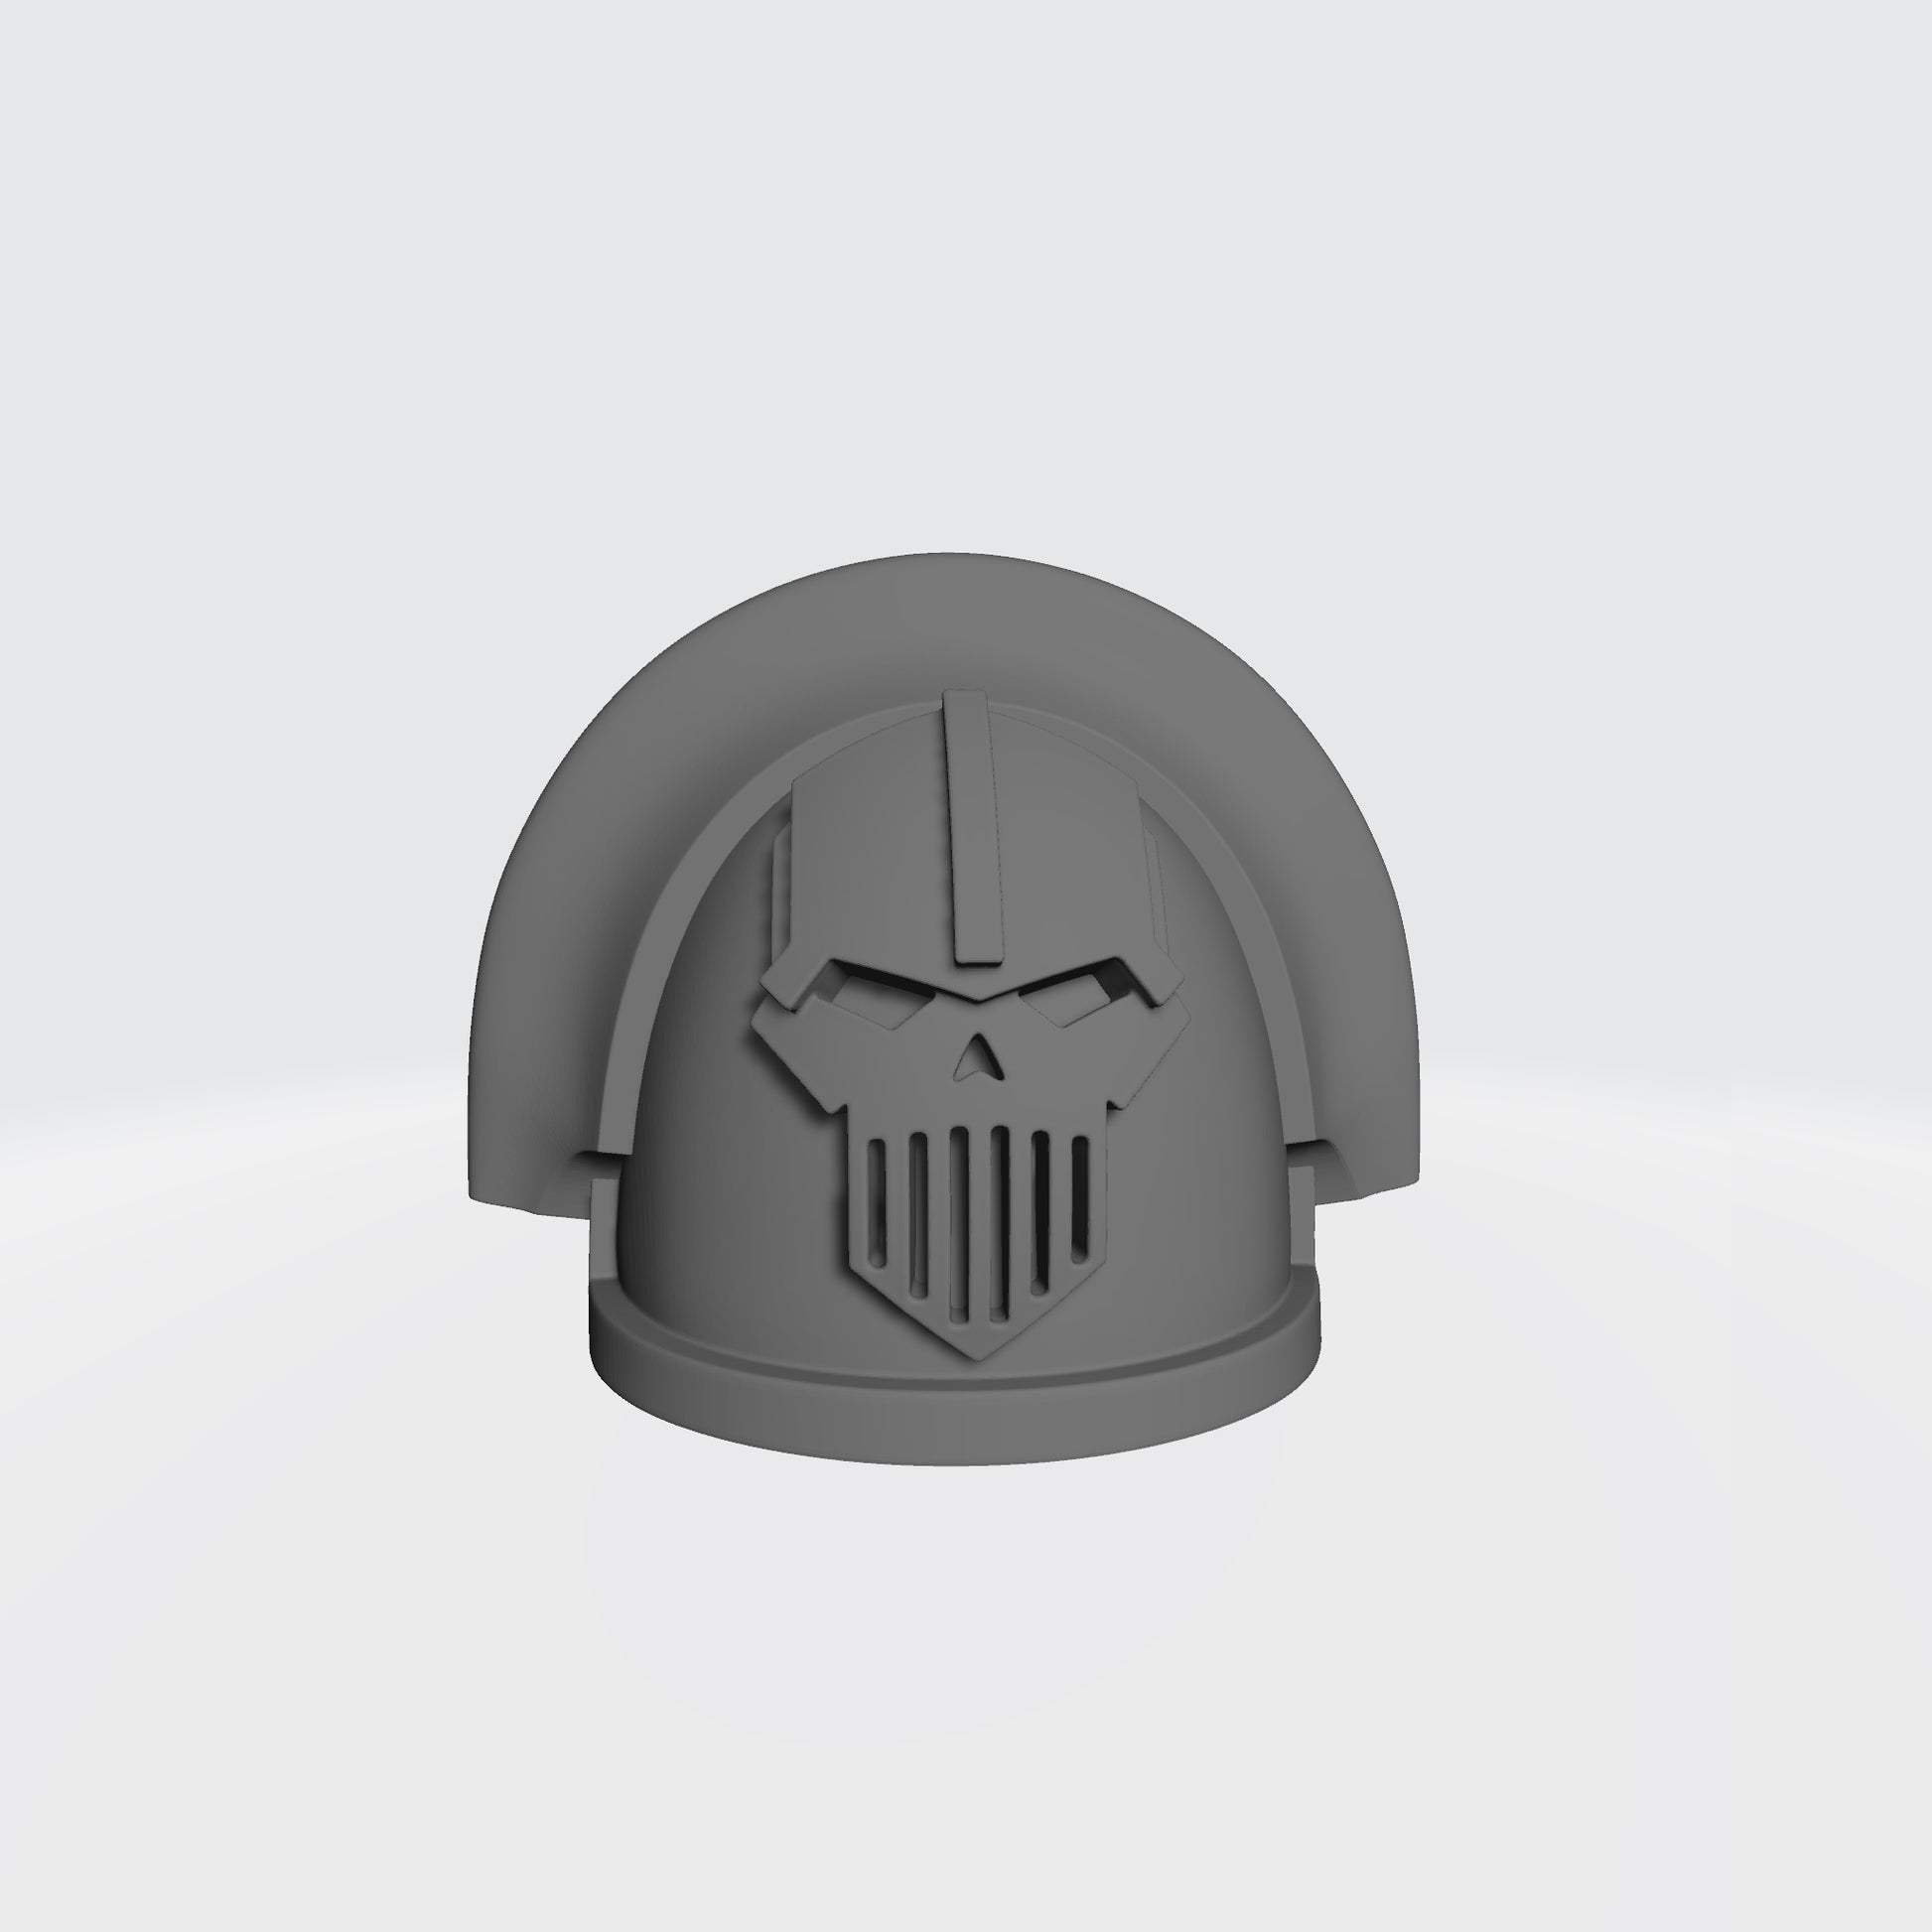 Iron Warriors MKIII Shoulder Pad with Ridge Compatible with McFarlane Toys 1:12th Scale Space Marine Action Figures from Fantasy World Games